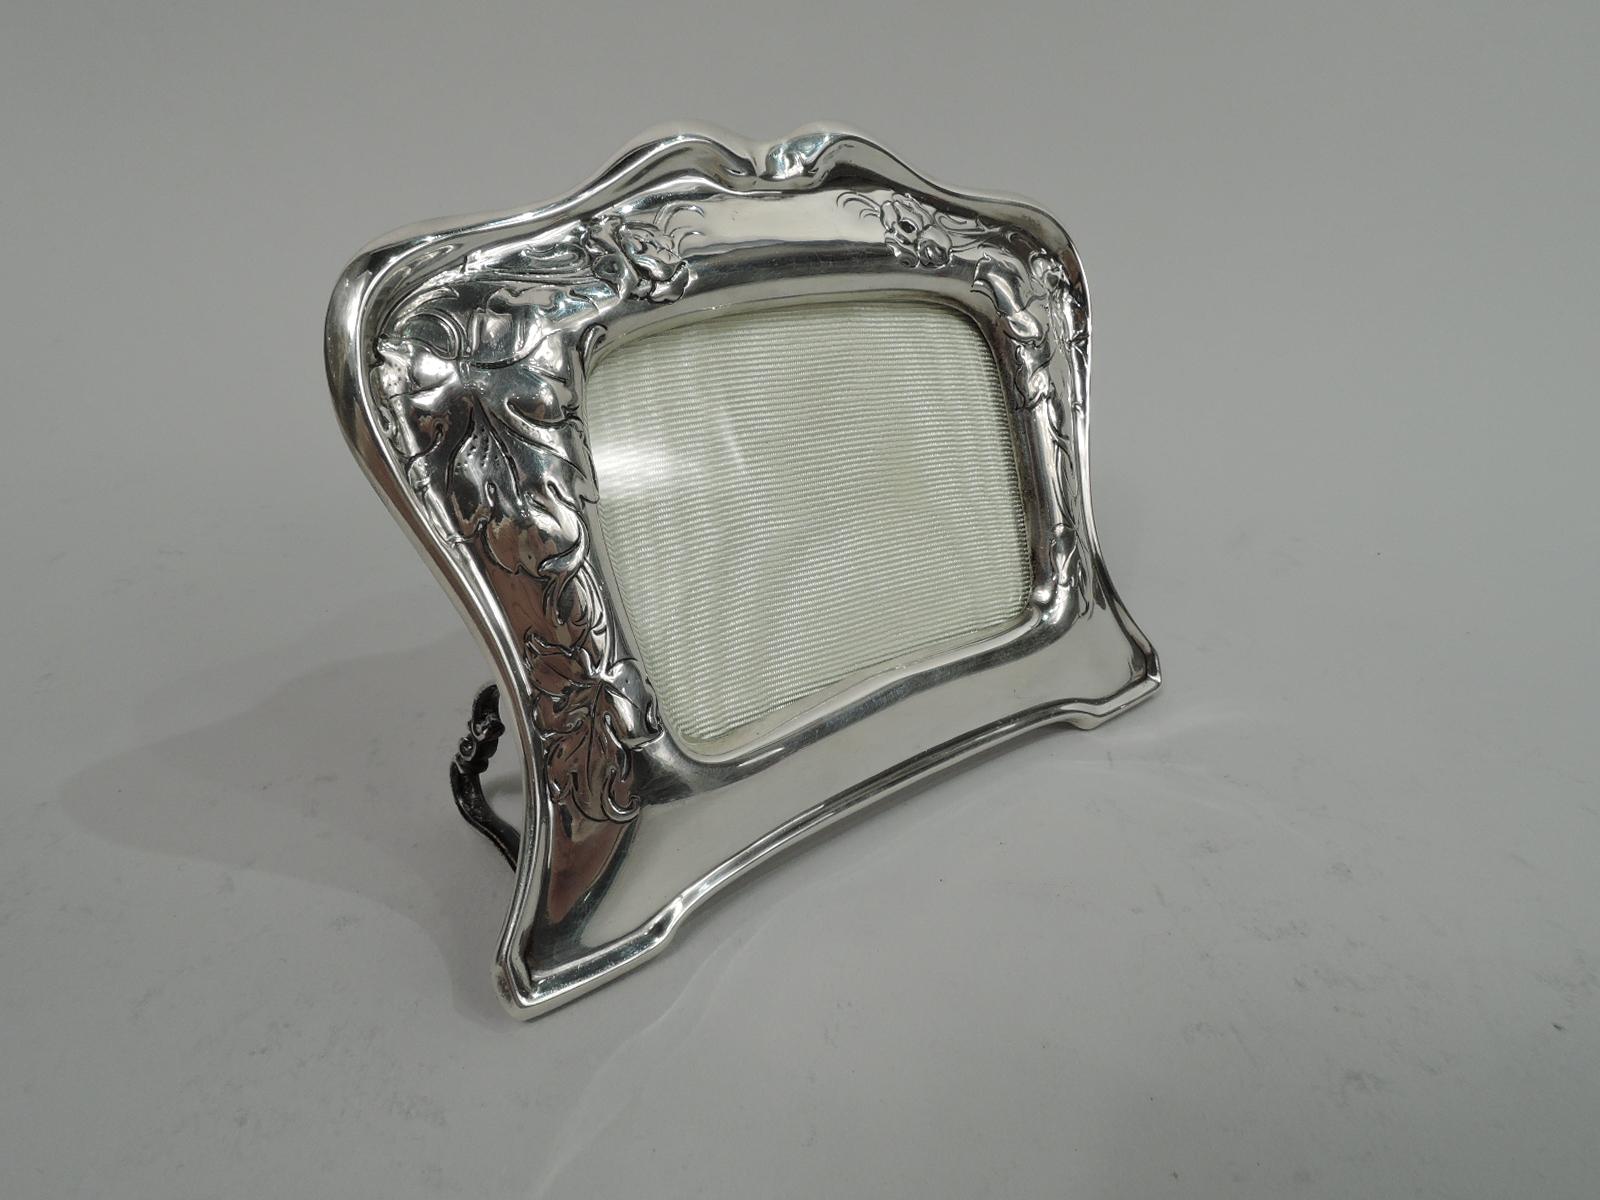 Art Nouveau sterling silver boudoir frame. Made by Gorham in Providence in 1902. Rectangular window in shaped surround with bracket feet and back-mounted scrolled loop supports. Fluid leaf and flowers chased and engraved on sides and top forming